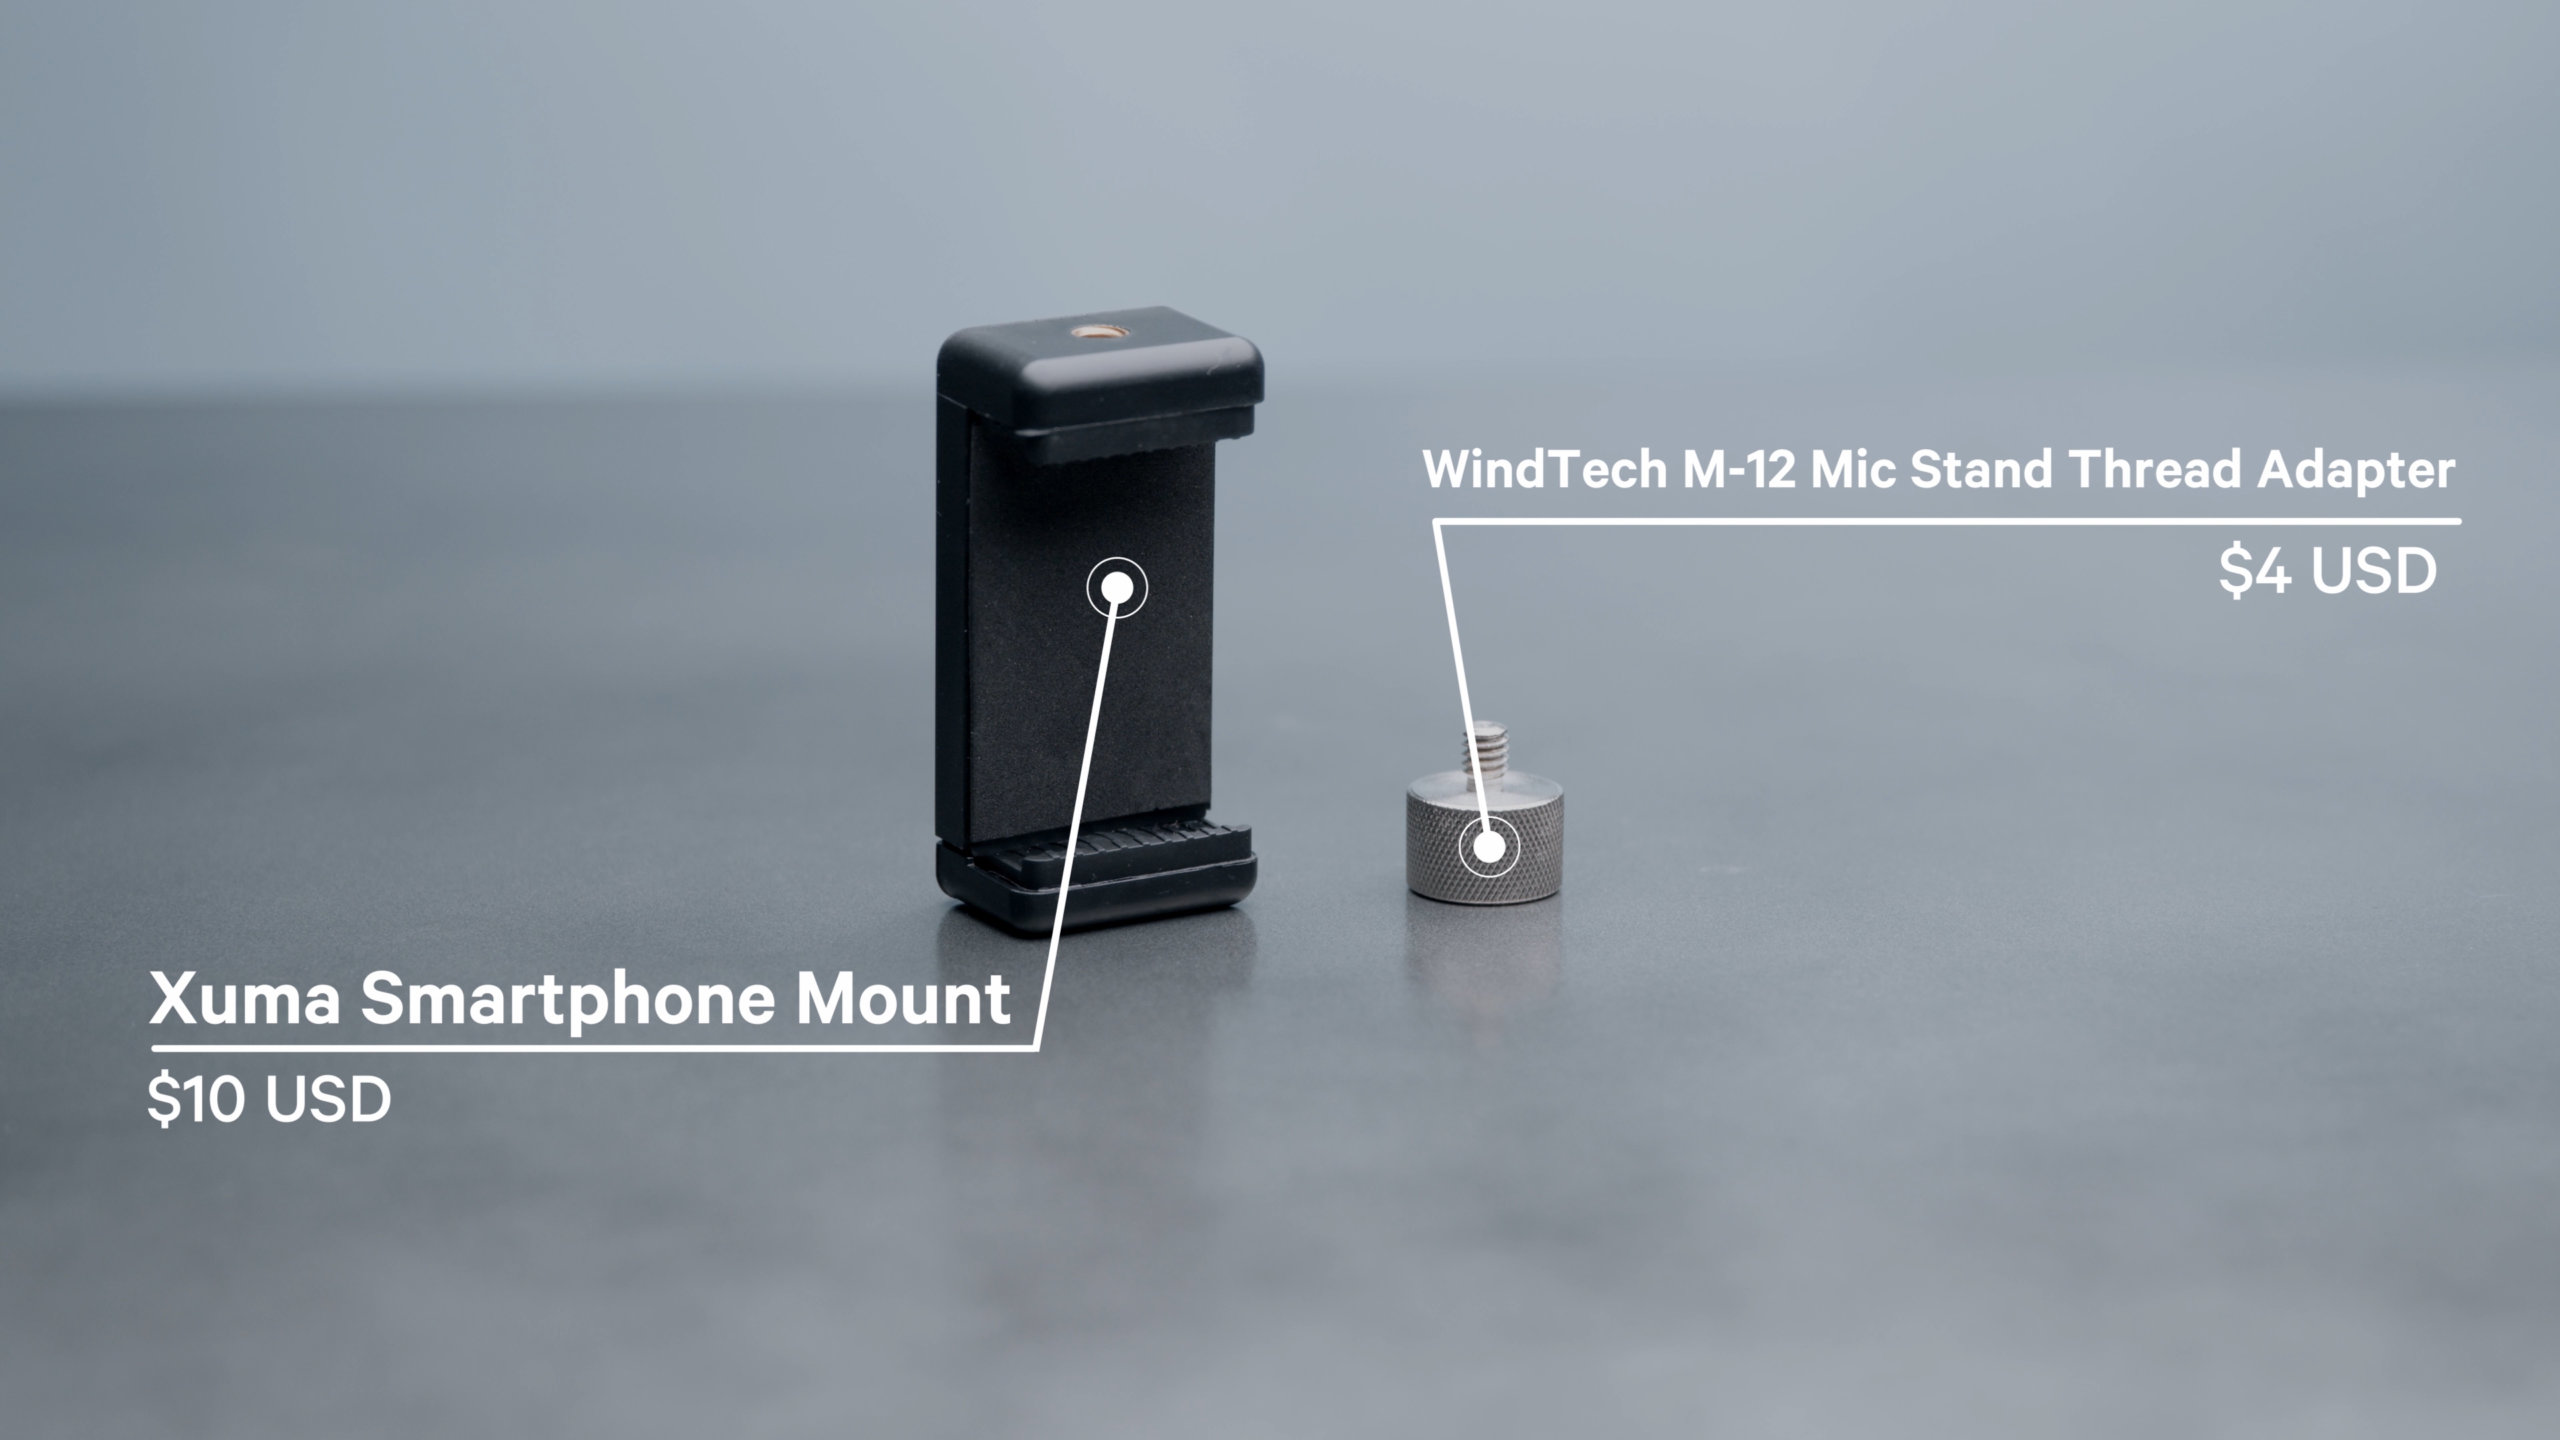 Mount your mobile device to a mic stand using this mount and thread adapter